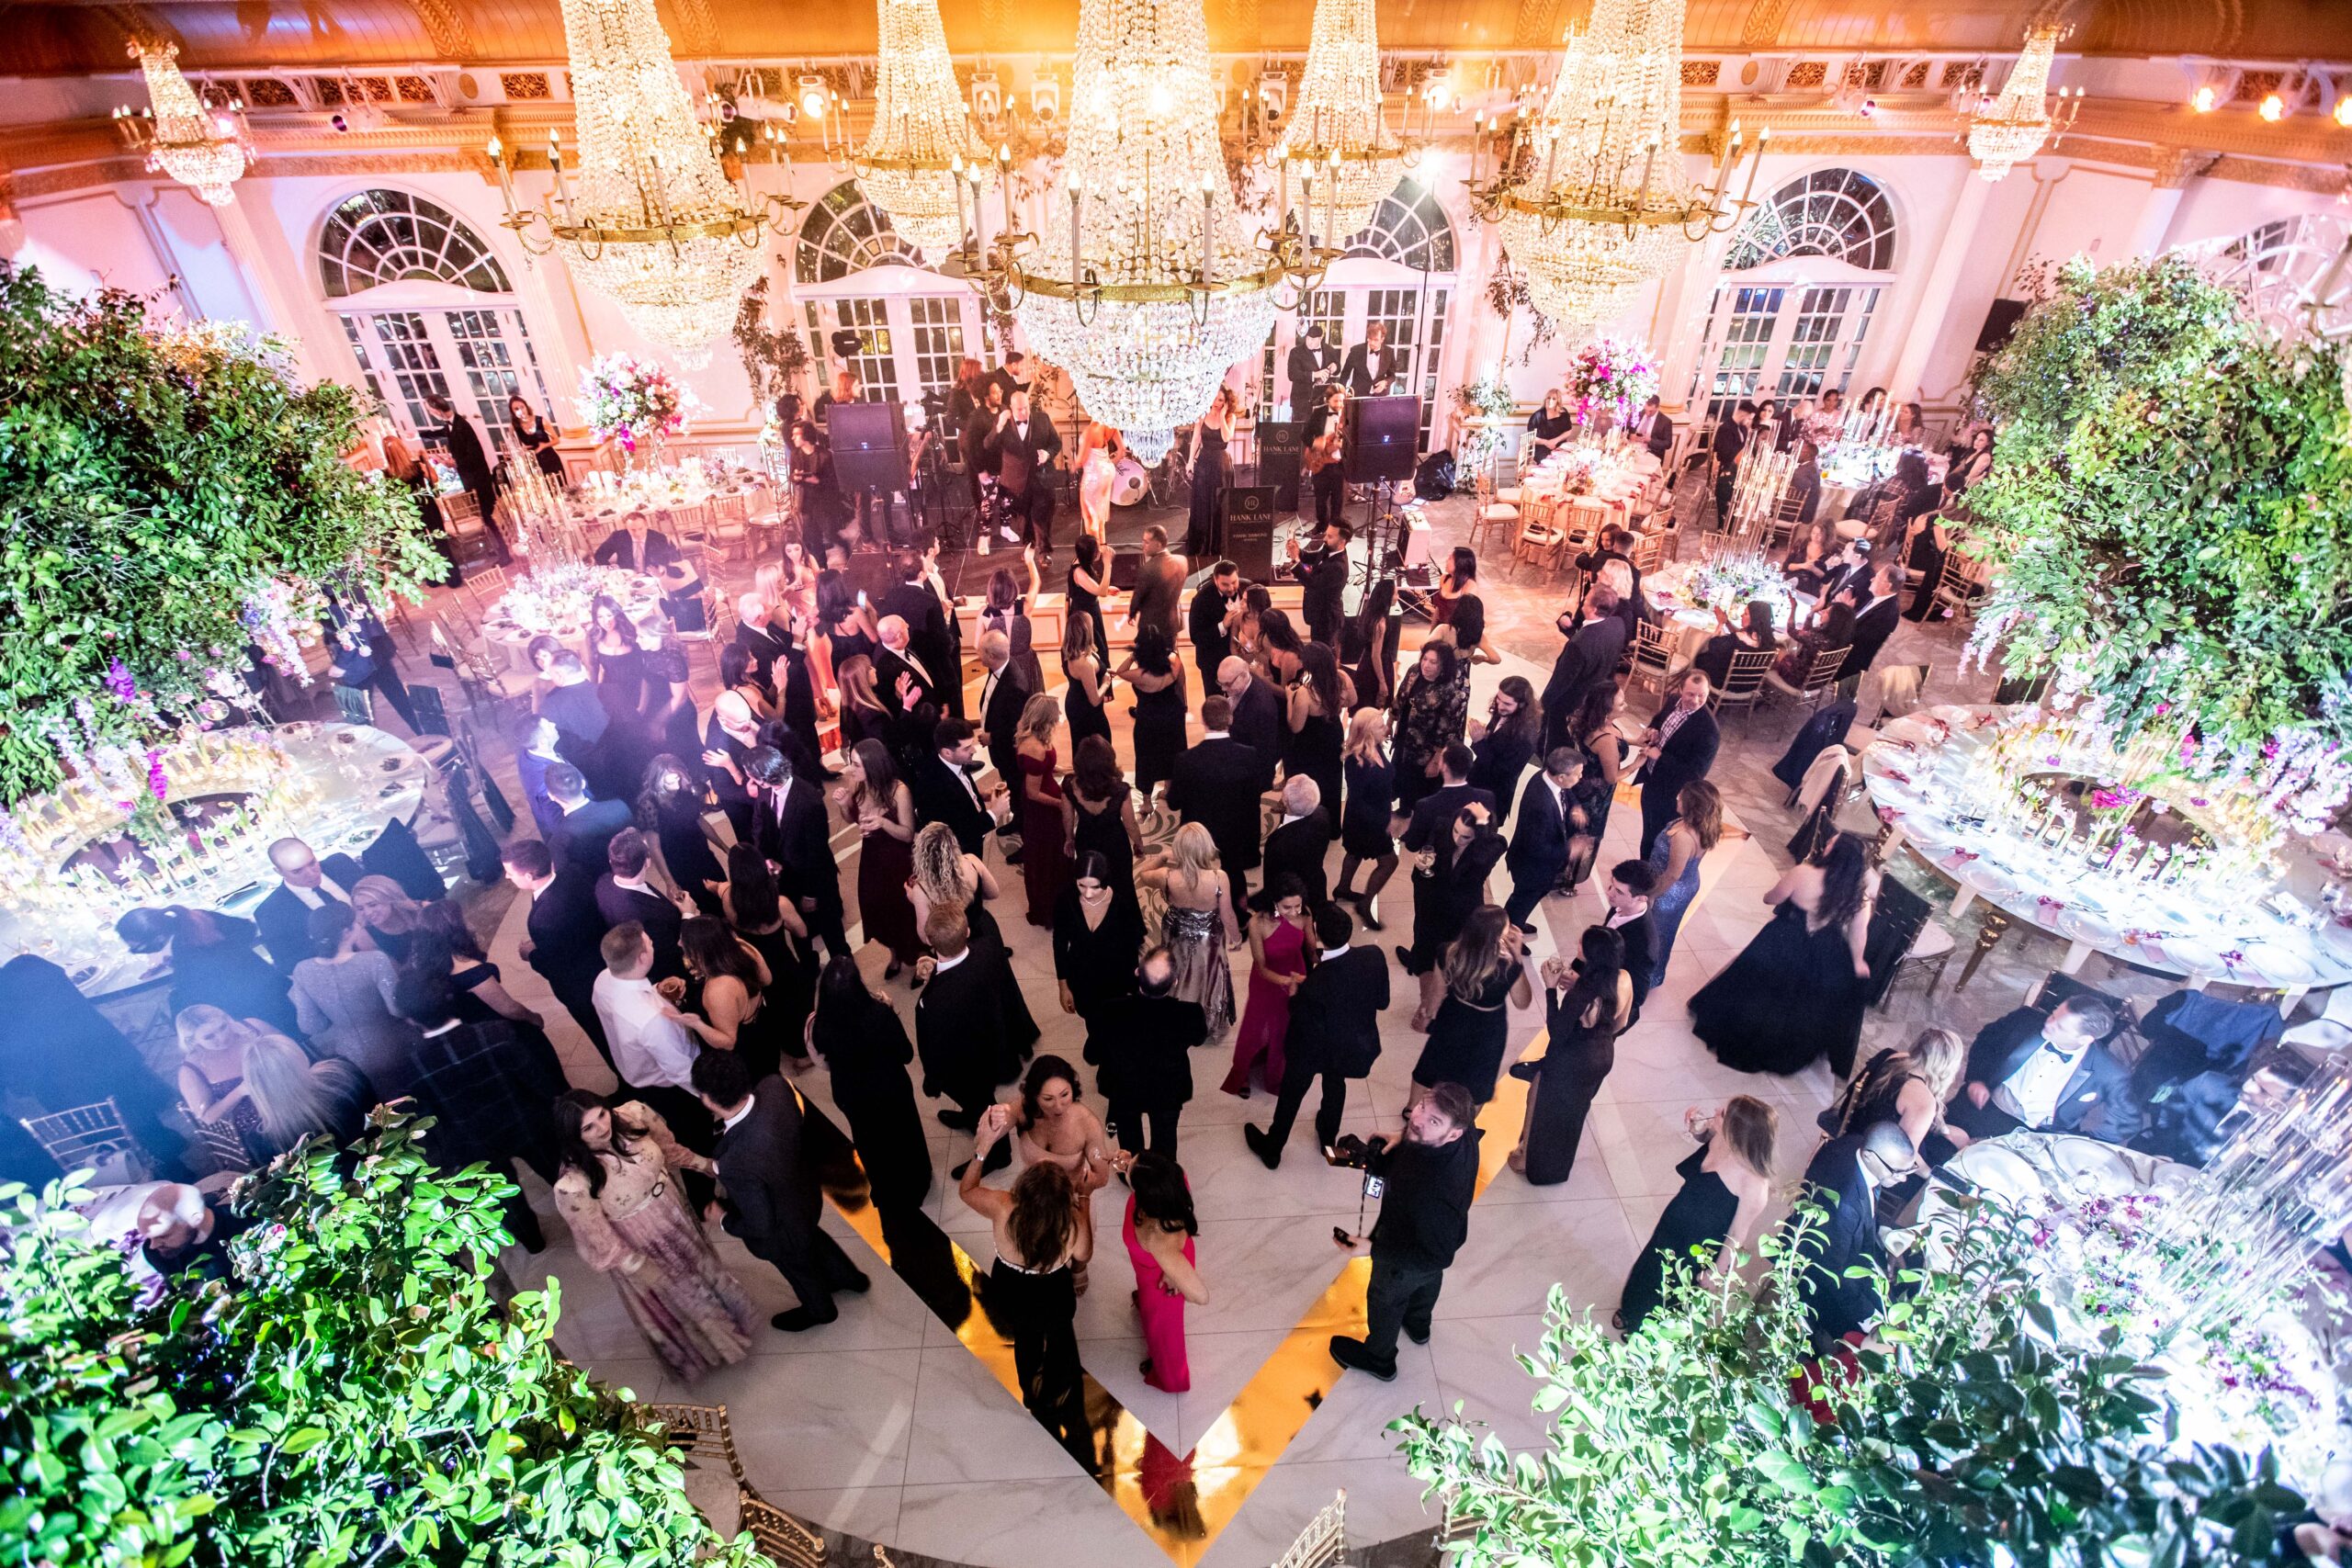 Guests mingle in Crystal Plaza's Grand Ballroom adorned with chandeliers, tree centerpieces, and purple flower accents.